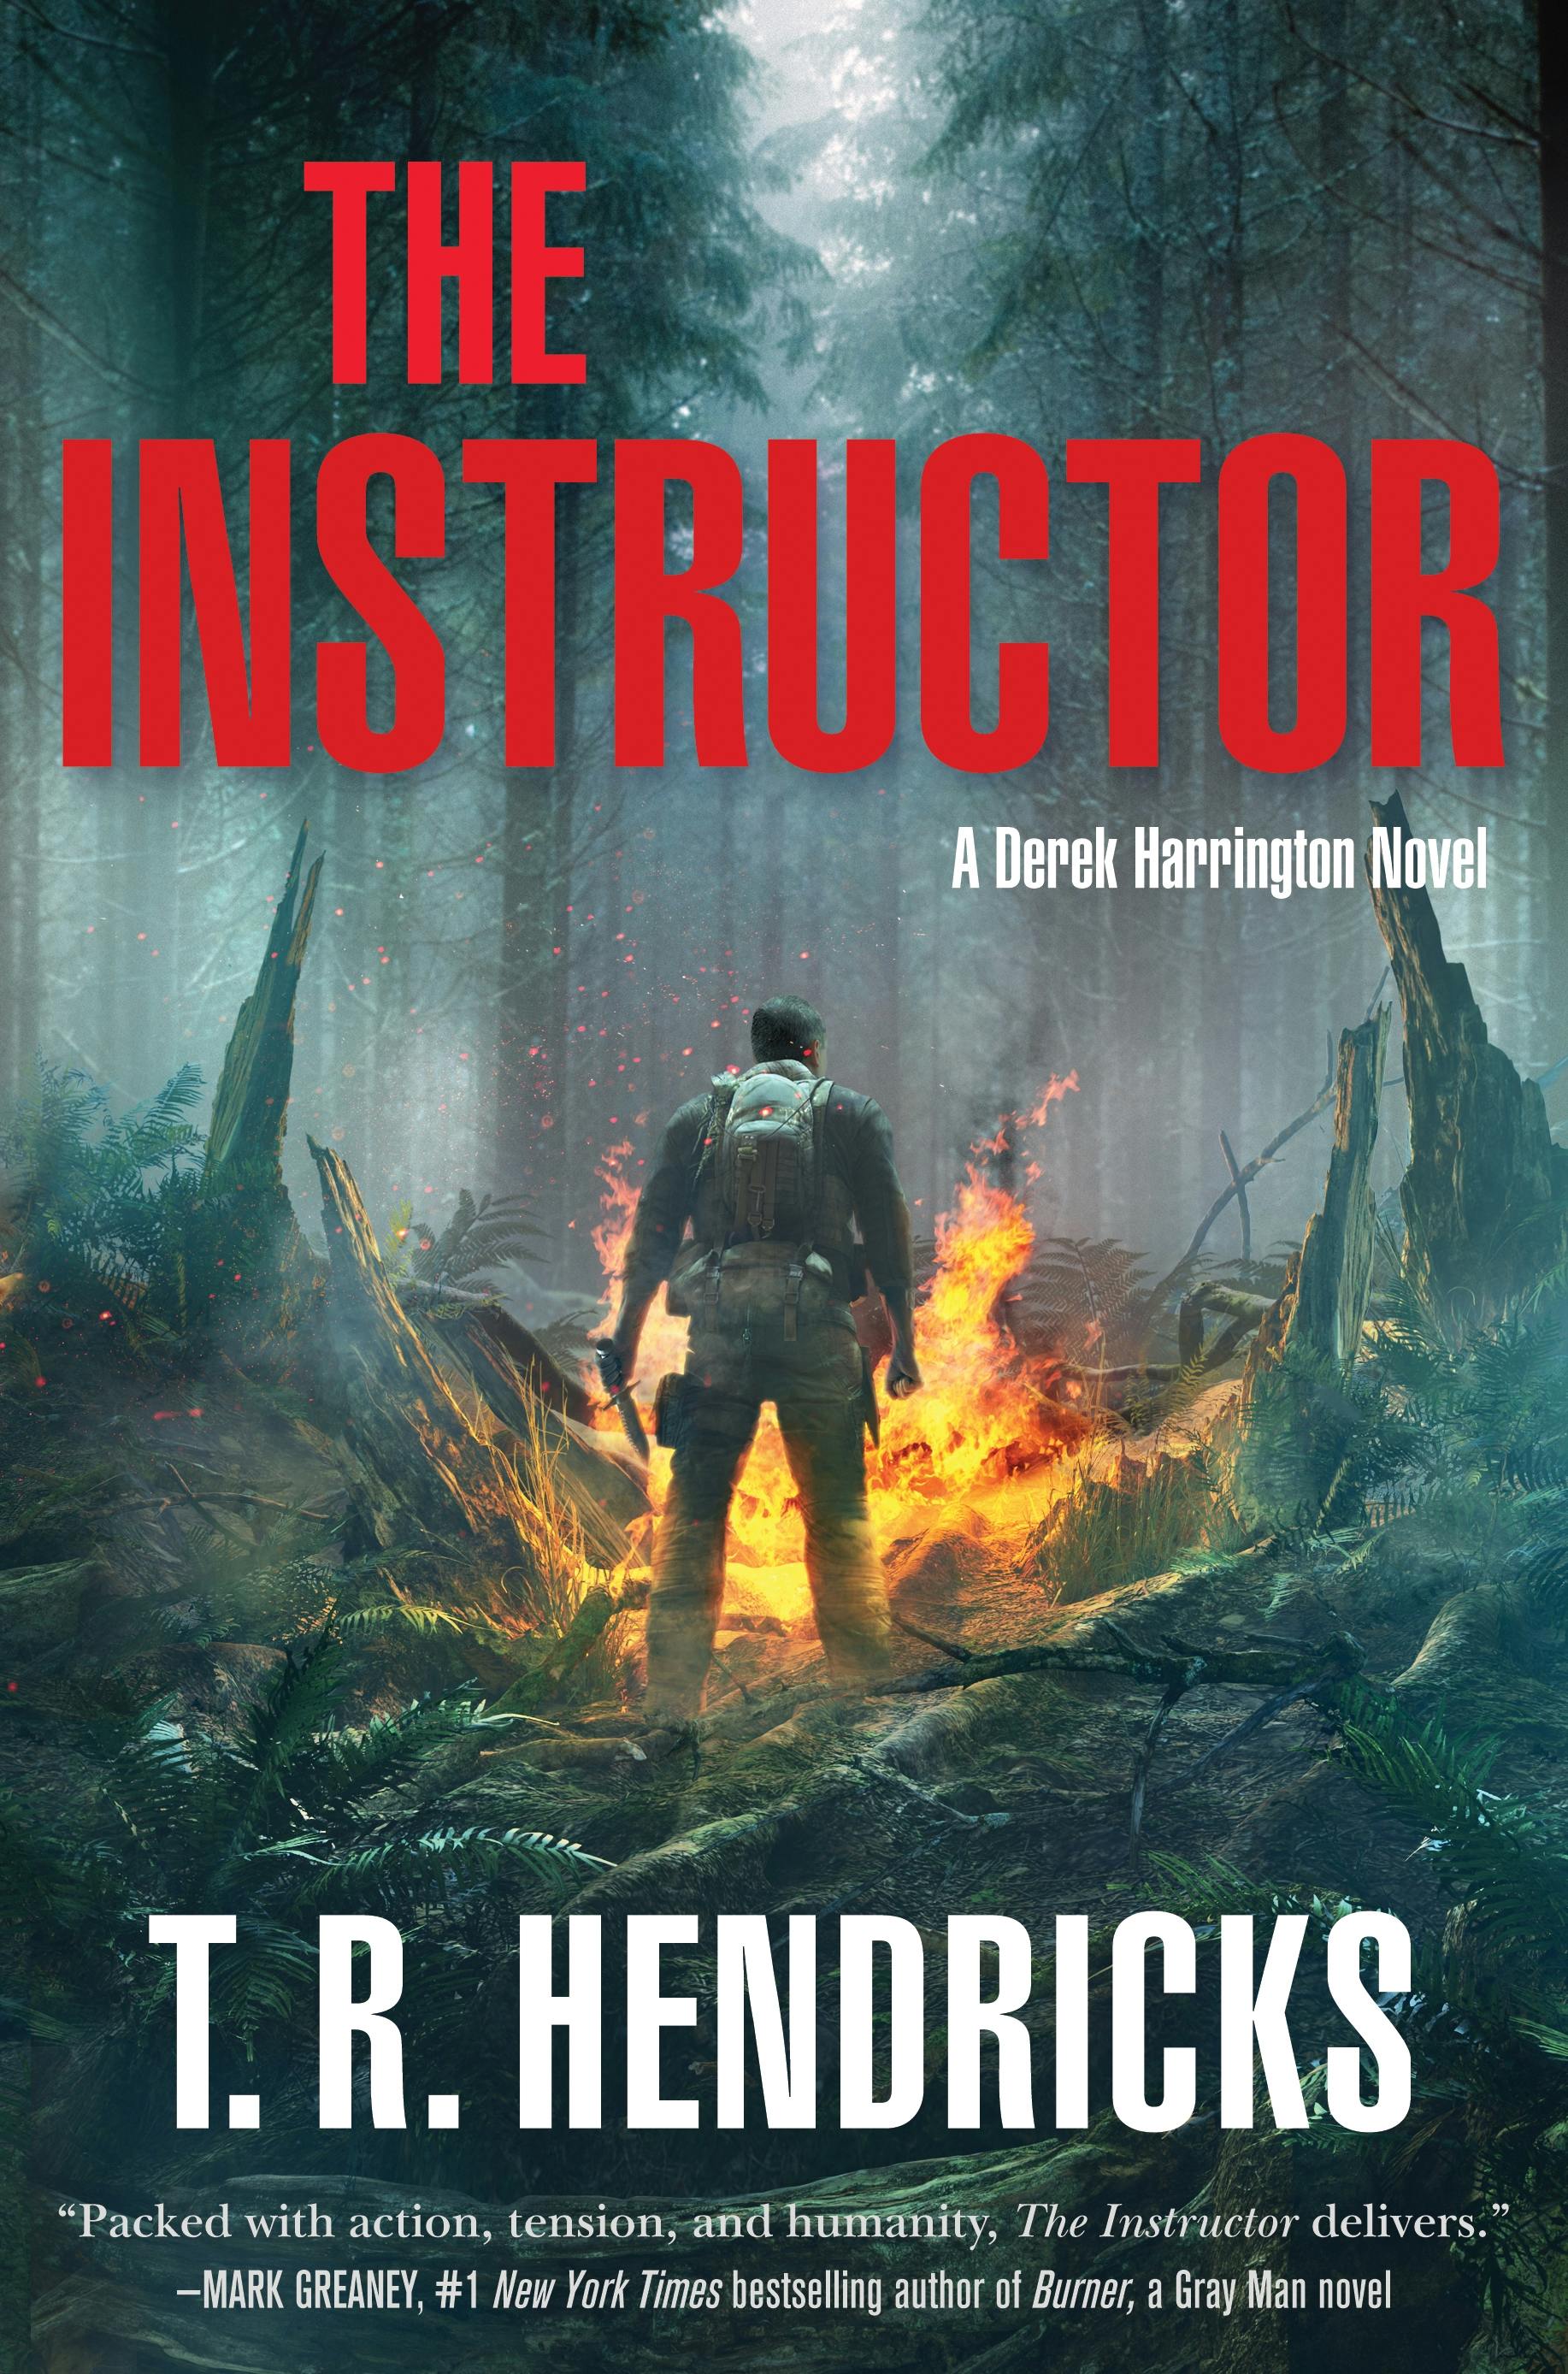 Cover for the book titled as: The Instructor